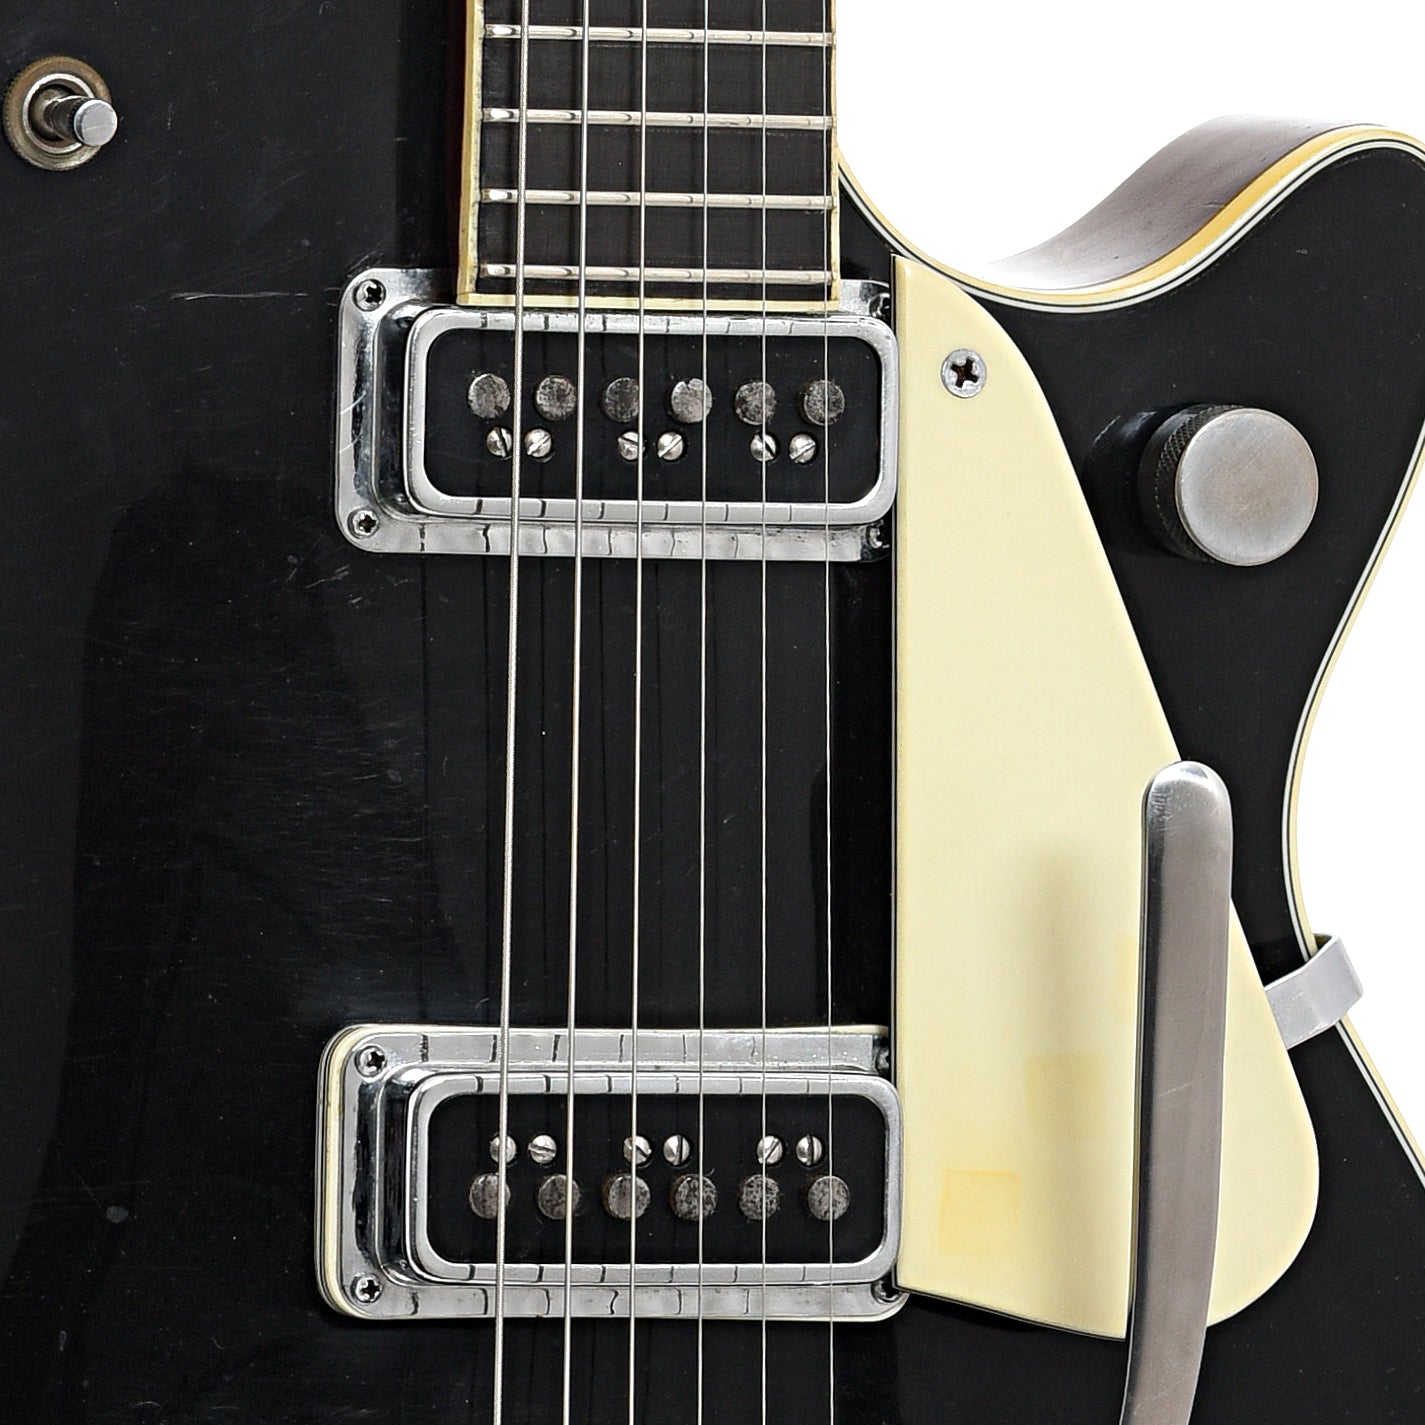 Pickups and pickguard of Gretsch 6128 Duo Jet